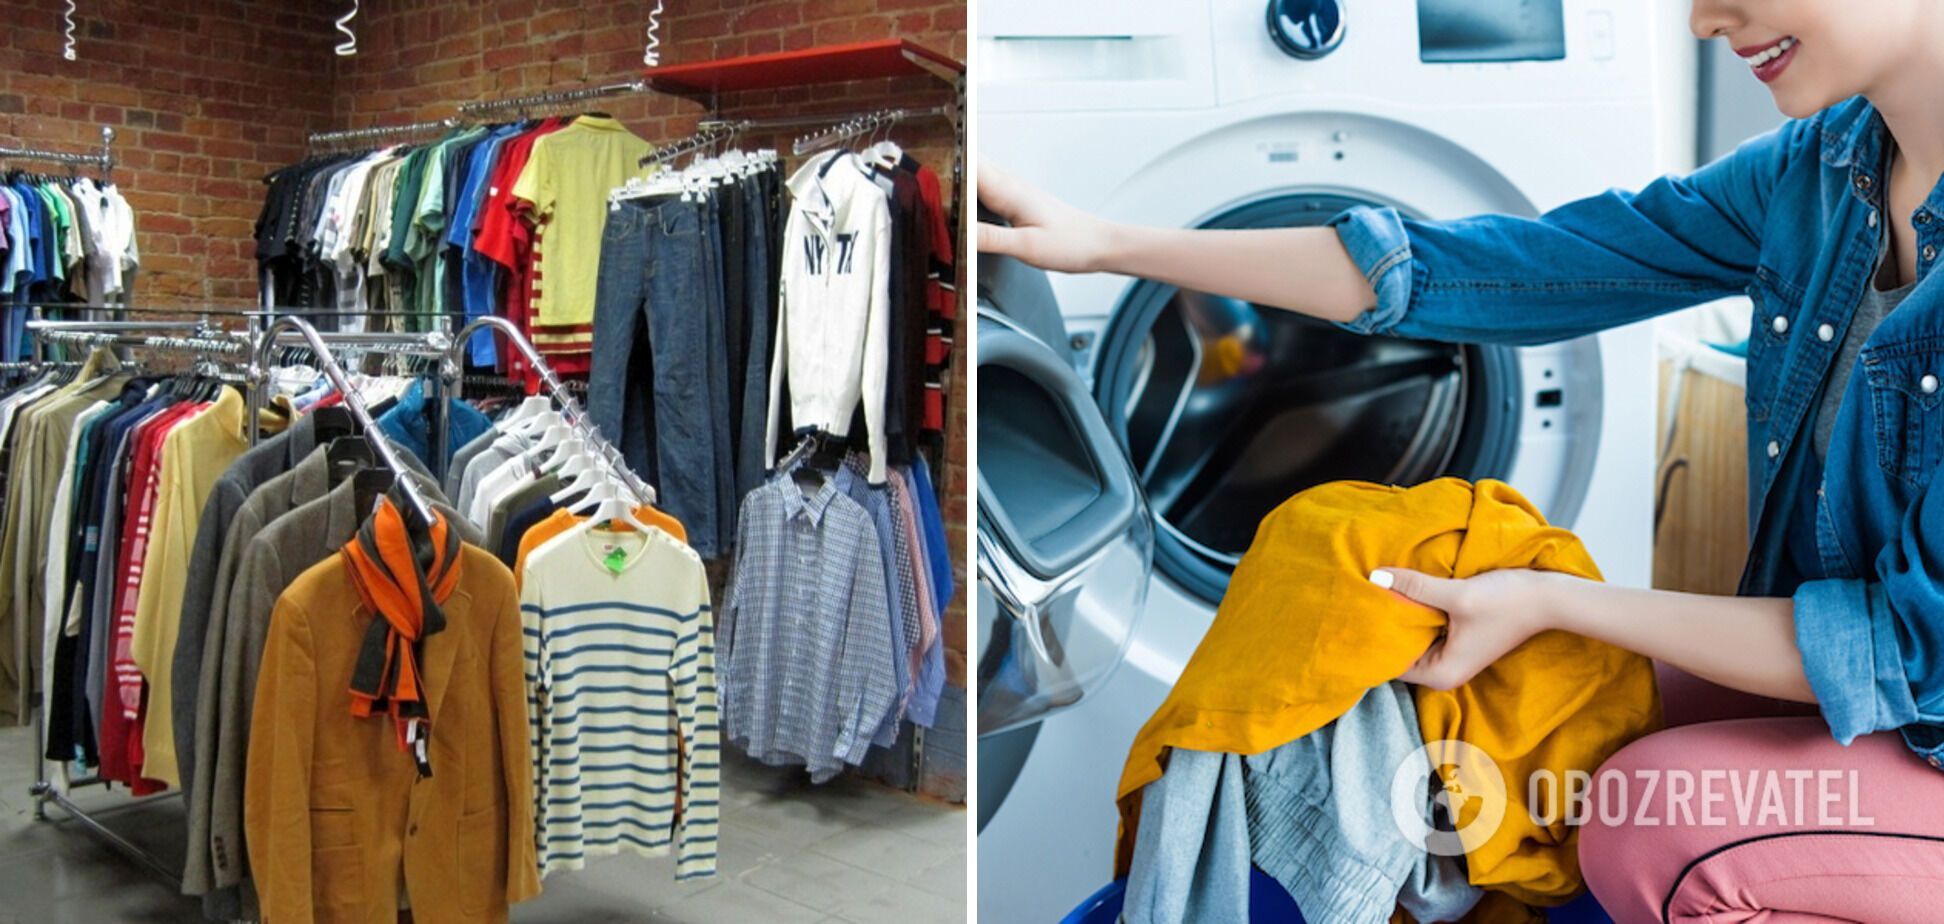 How to get rid of second hand odor on clothes: two reliable ways